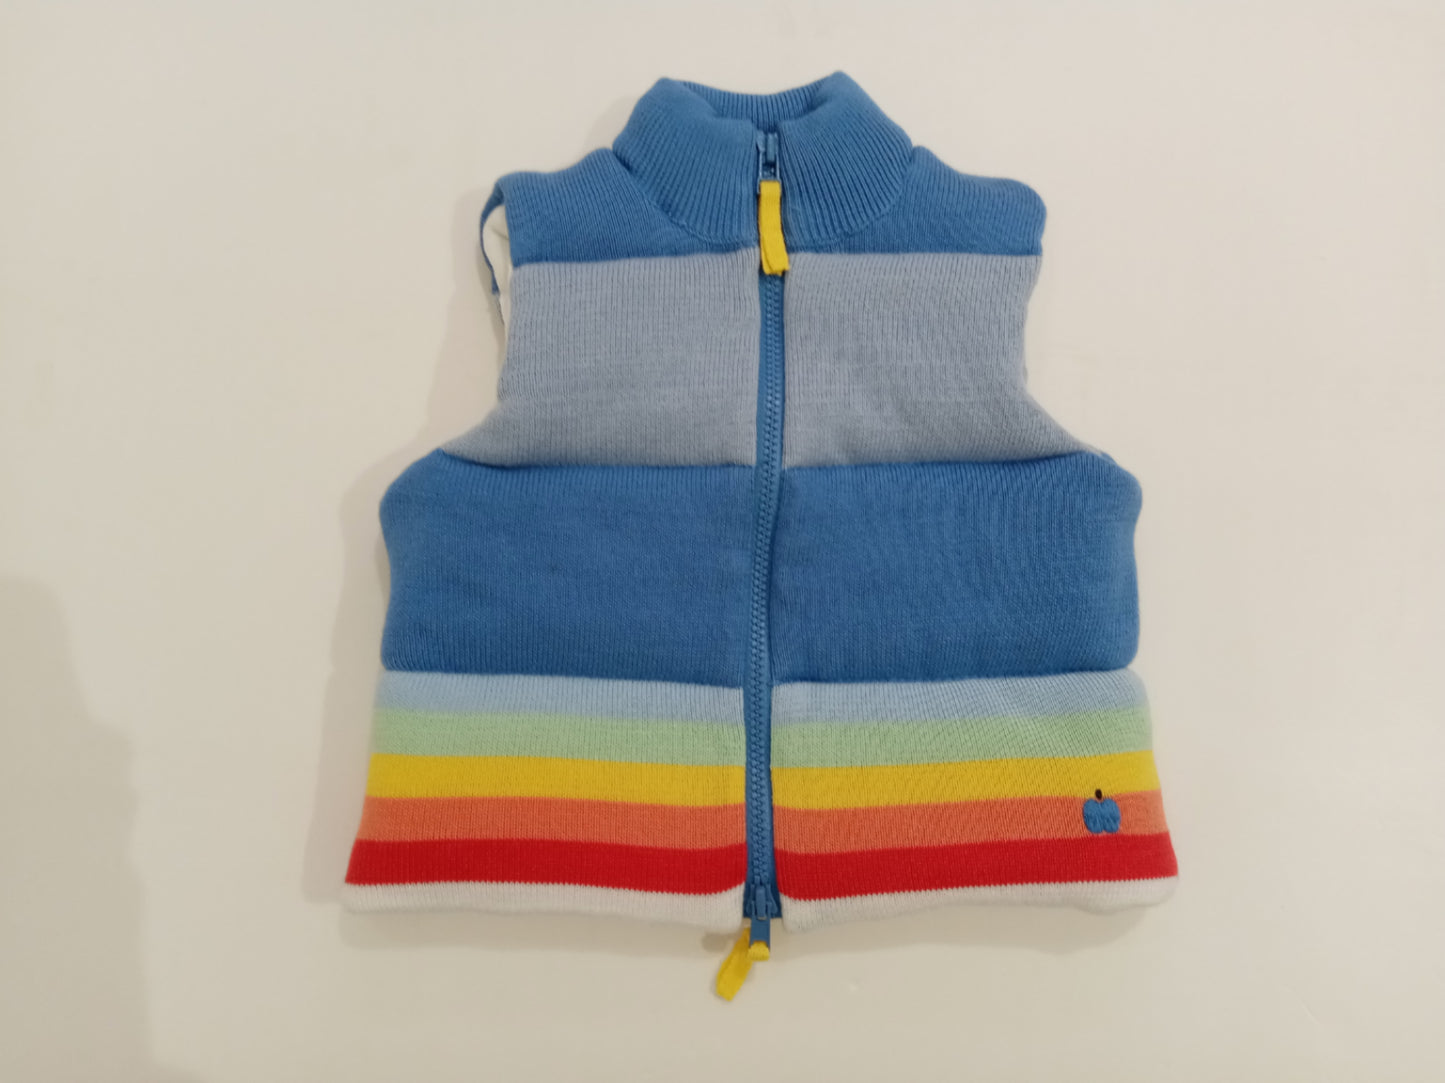 GILET - BABY - 3 COLOR (BLUE/PINK/GREY) - BBA15 005